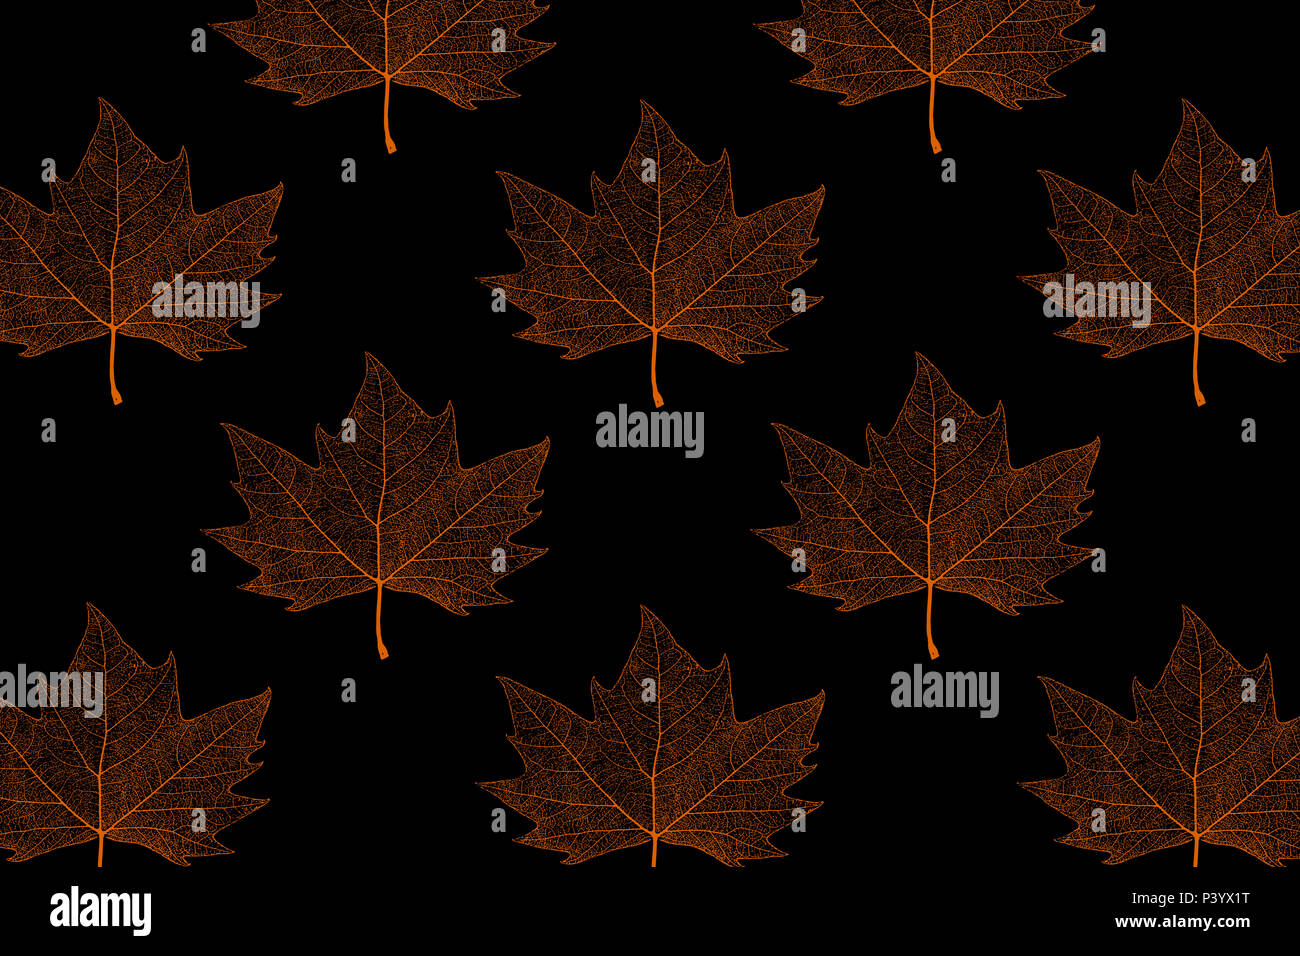 Template with maple leaf on an black background.  Maple leaf patch. Stock Photo